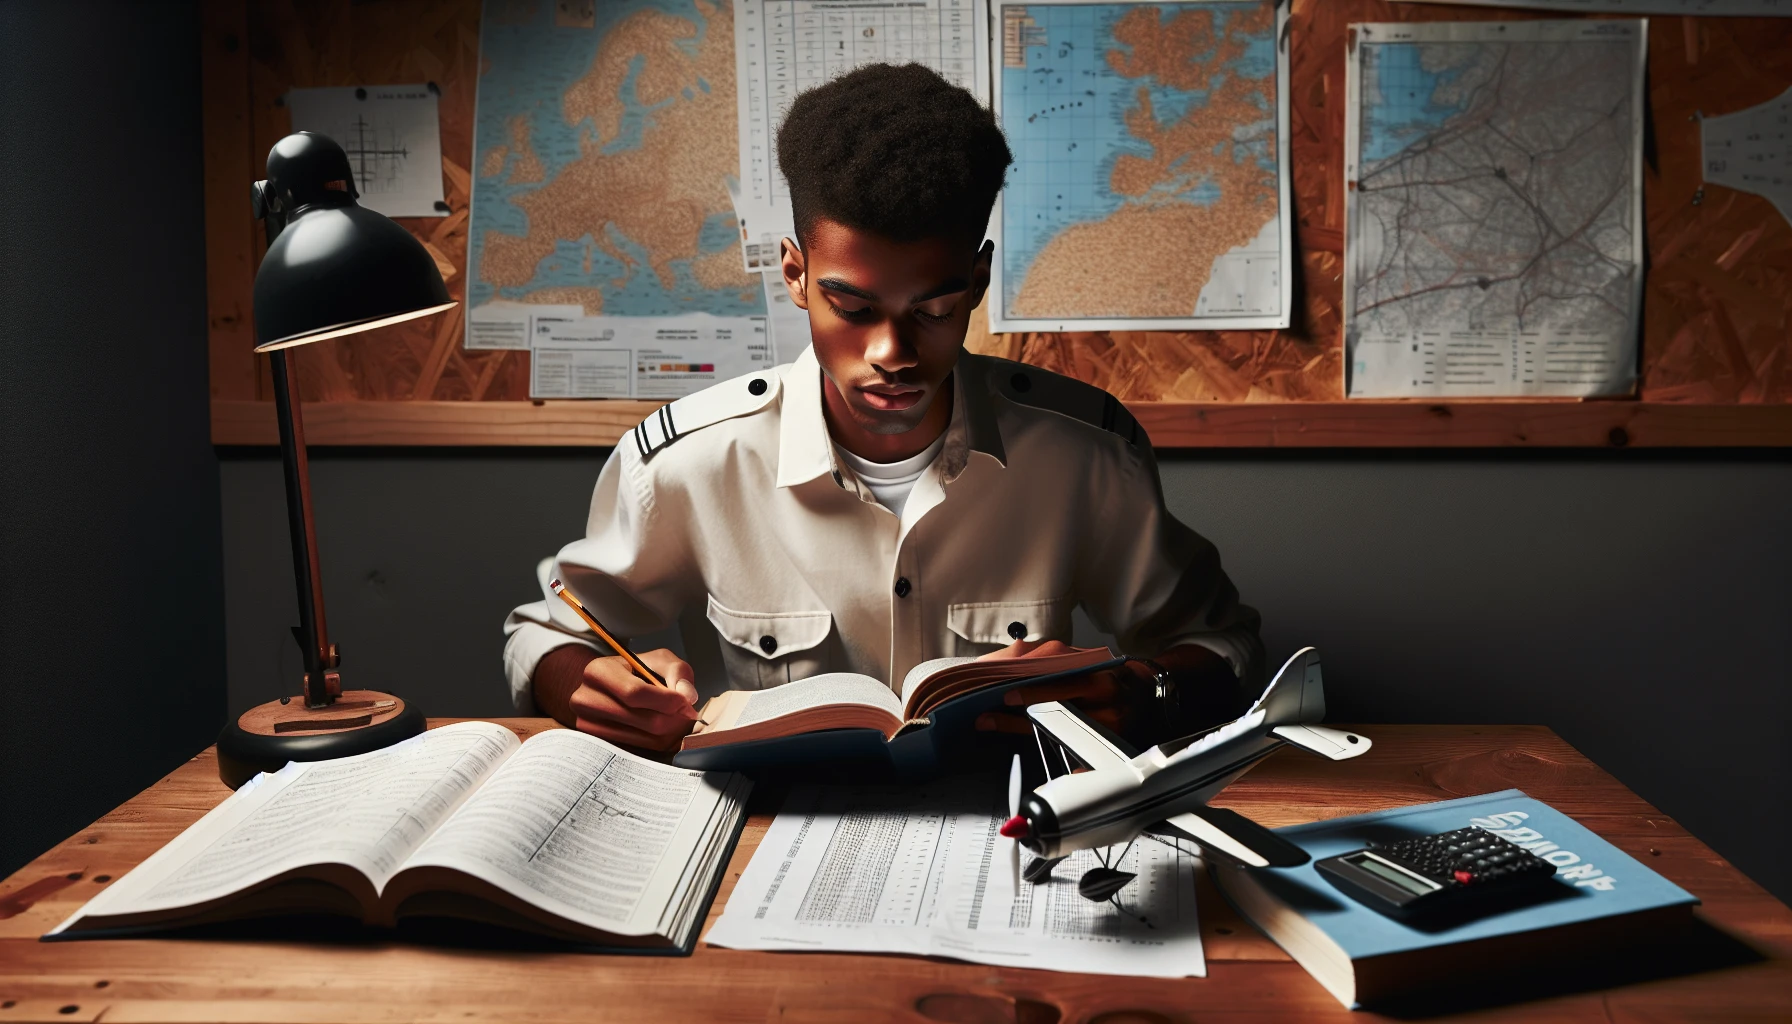 Illustration of a student pilot taking a practice test for FAA knowledge exam